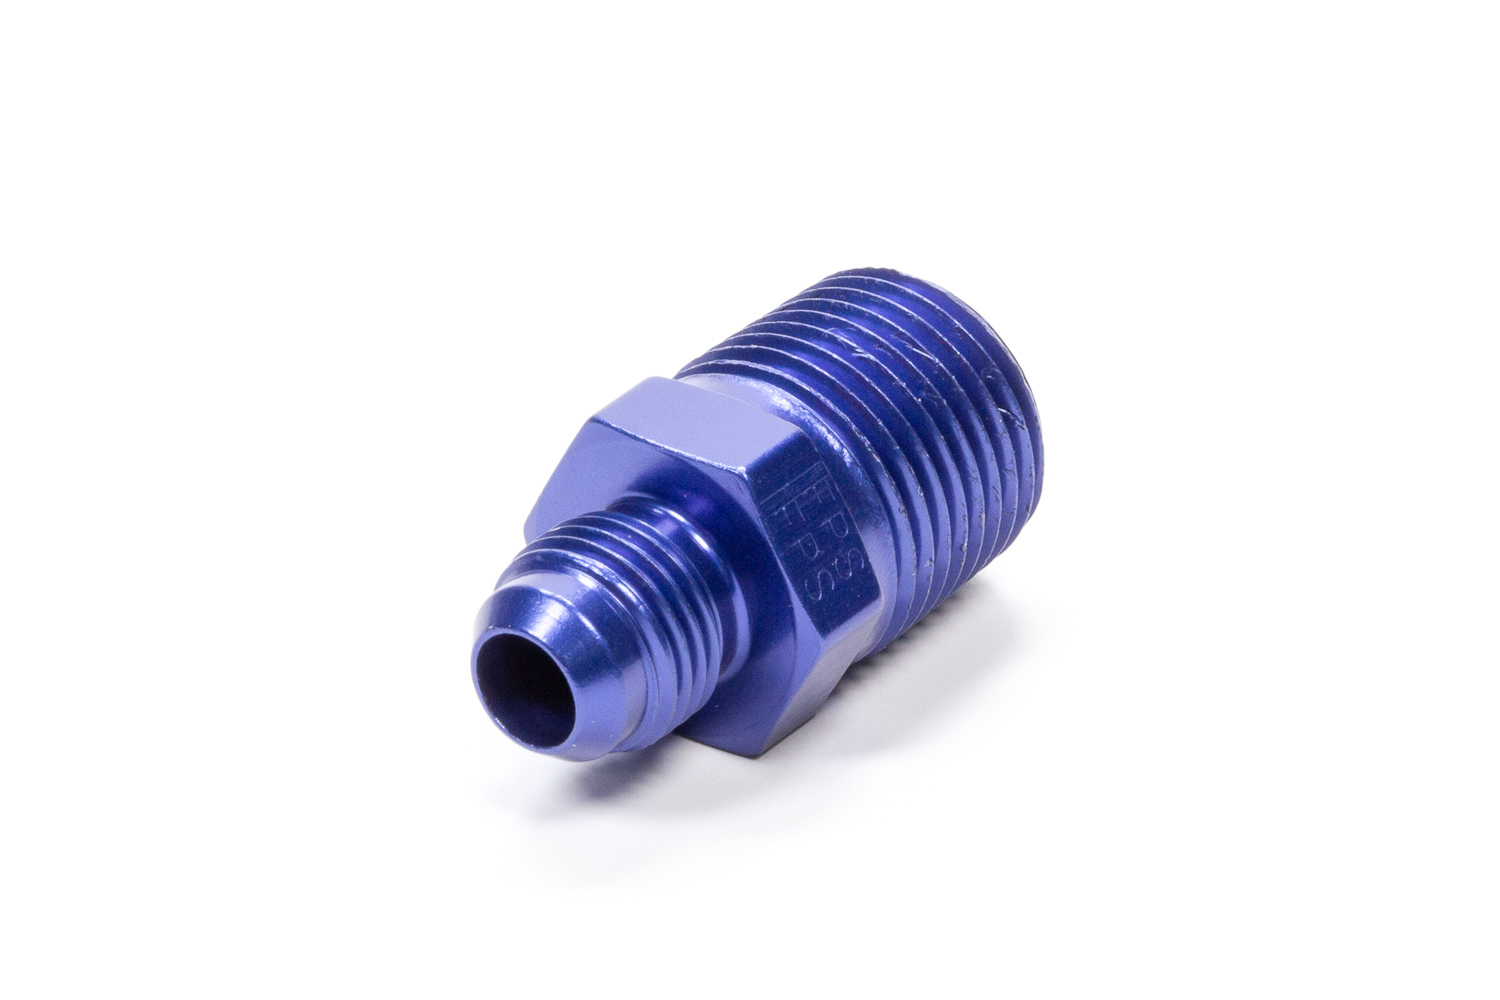 Fragola 481668 - Straight Adapter Fitting #6 x 1/2 MPT